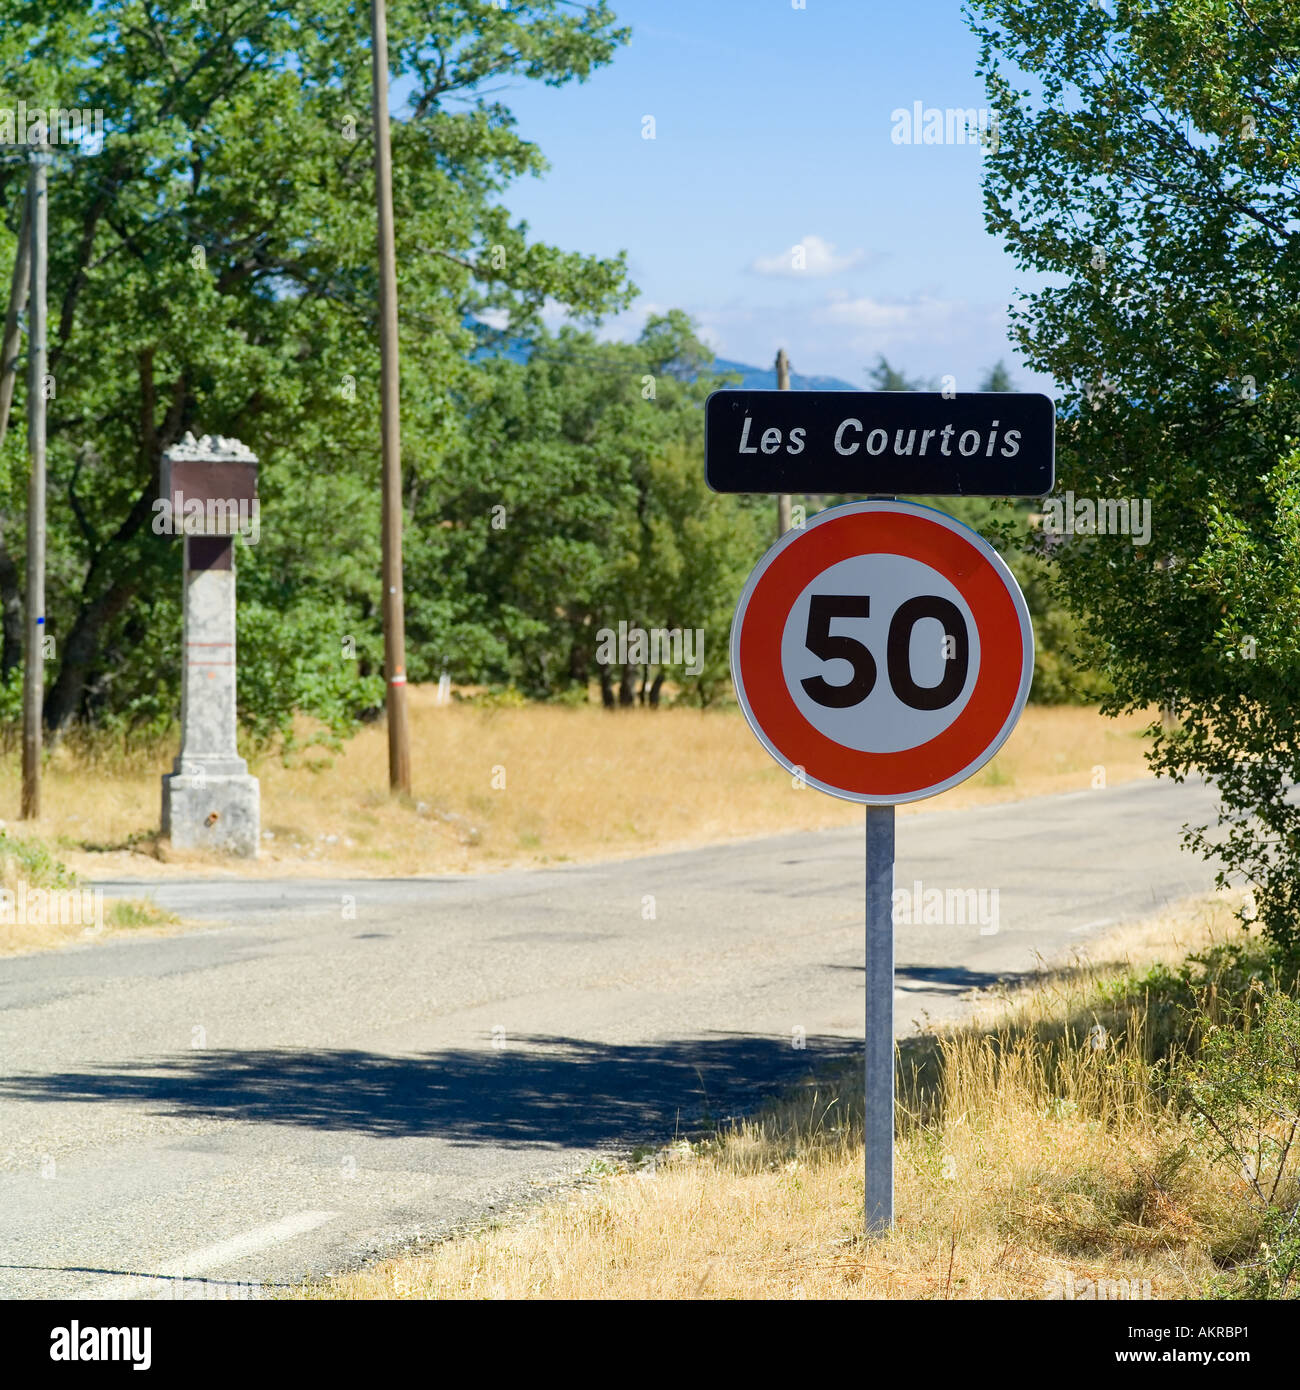 Les Courtois locality name sign, 50 speed limit traffic sign, Sault valley, Vaucluse, Provence, France Stock Photo